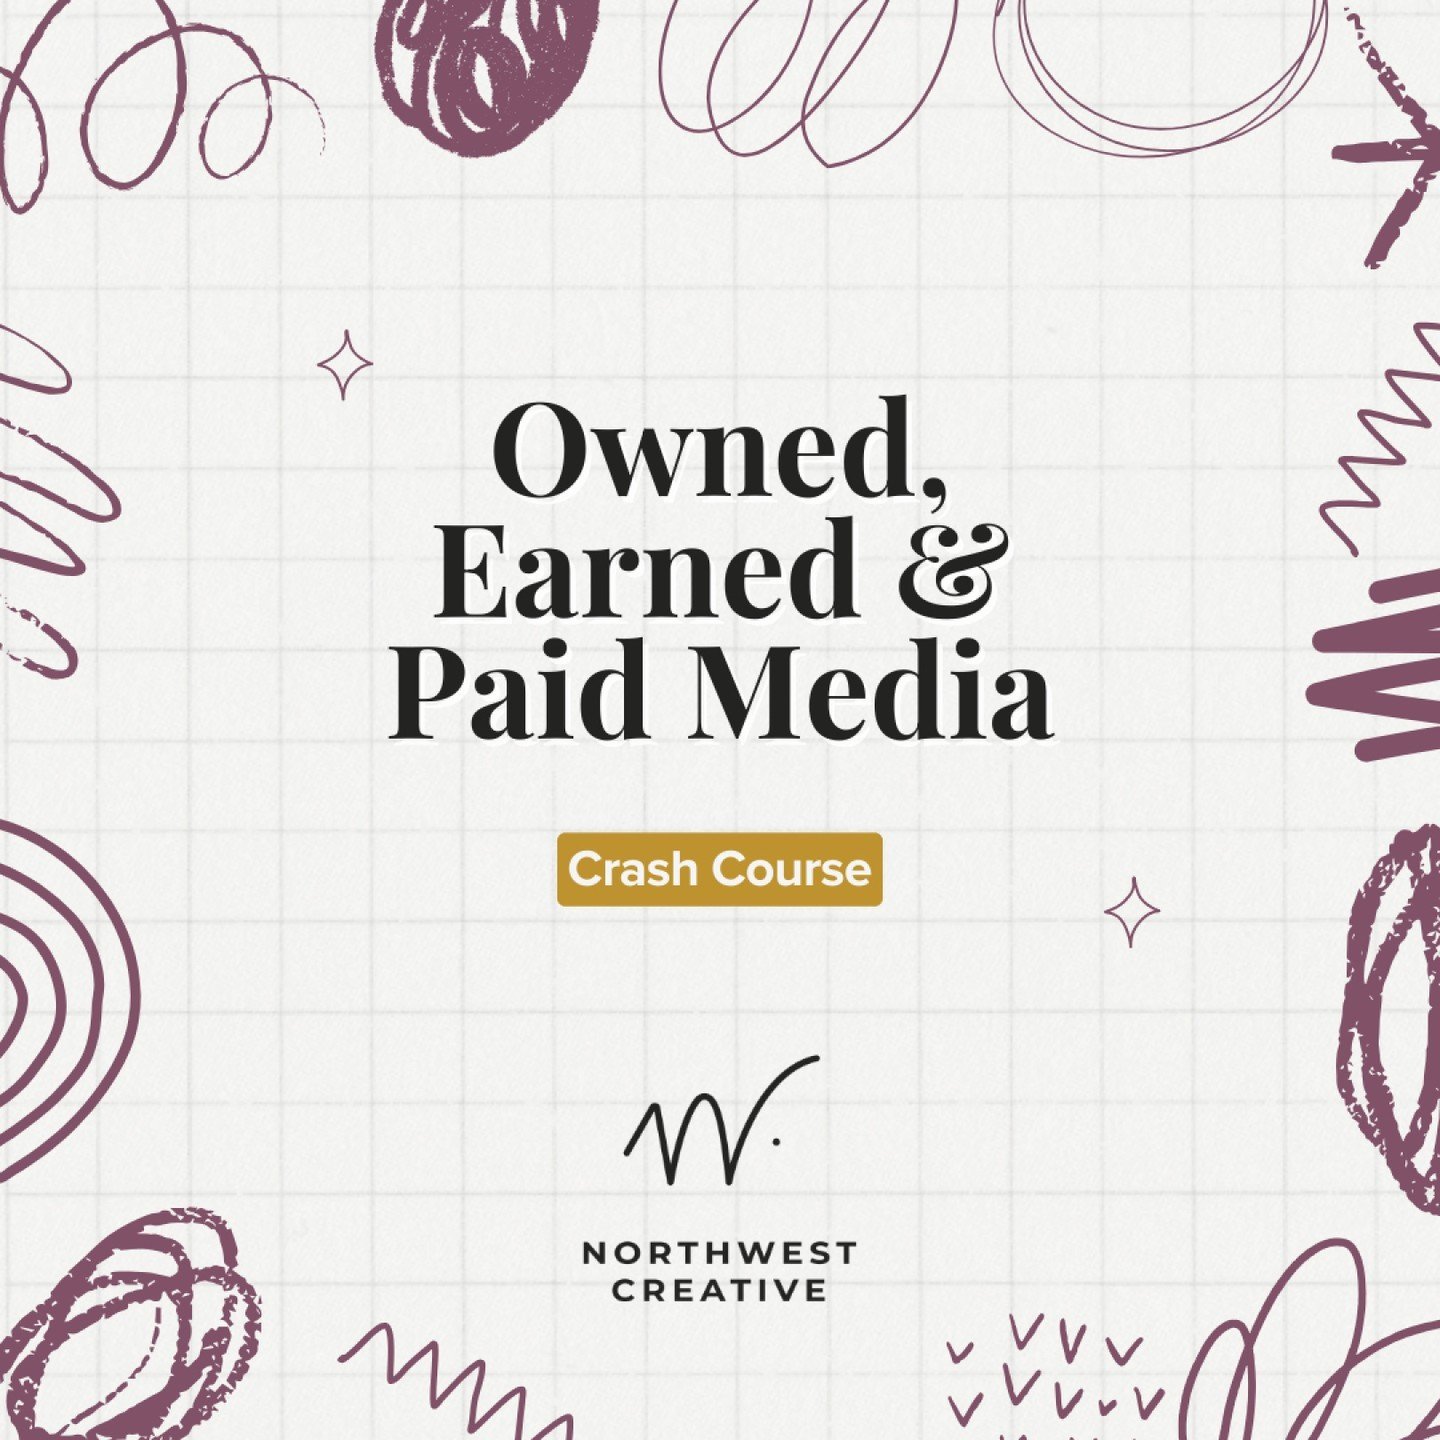 ✨ CRASH COURSE ✨

Want to know the best way to maximize your marketing strategy and actually reach your ideal customer?

Integrate three media types: owned, earned, and paid media. 🌿 Combining your marketing efforts into these buckets will help you 